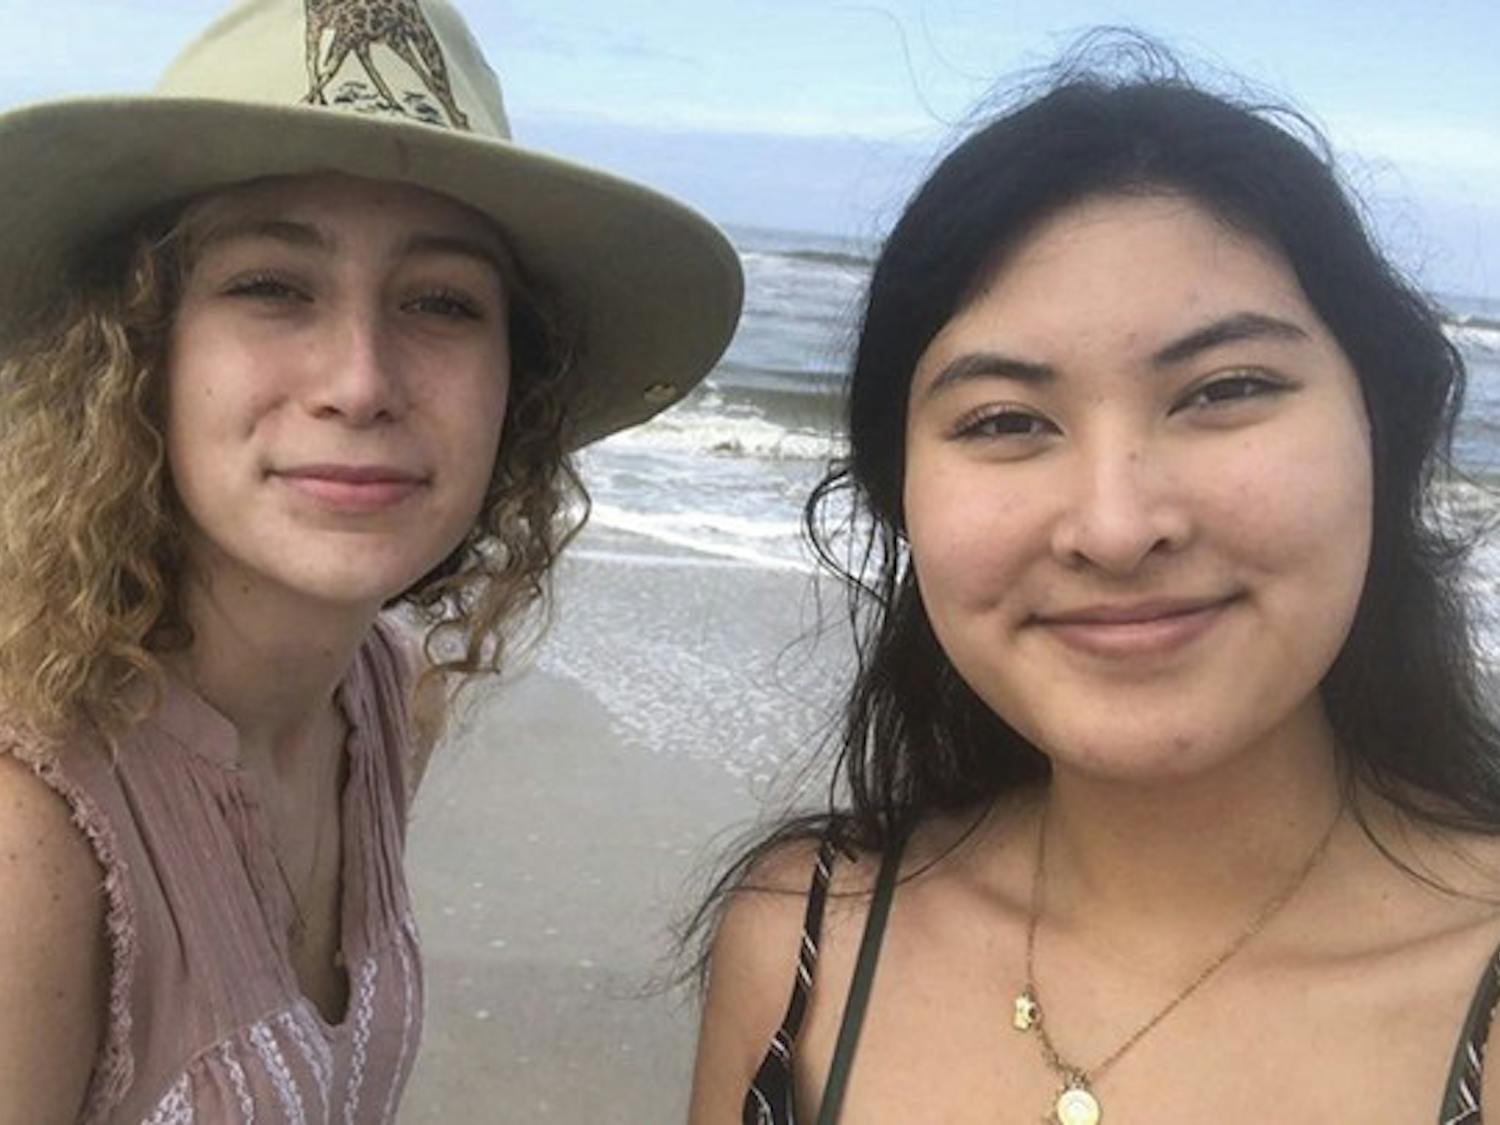 Editor-in-chief Erin Slowey and managing editor Rita Naidu spent spring break on Amelia Island from March 9 - 12. The news broke about the spring break extension two days after this photo was taken.&nbsp;